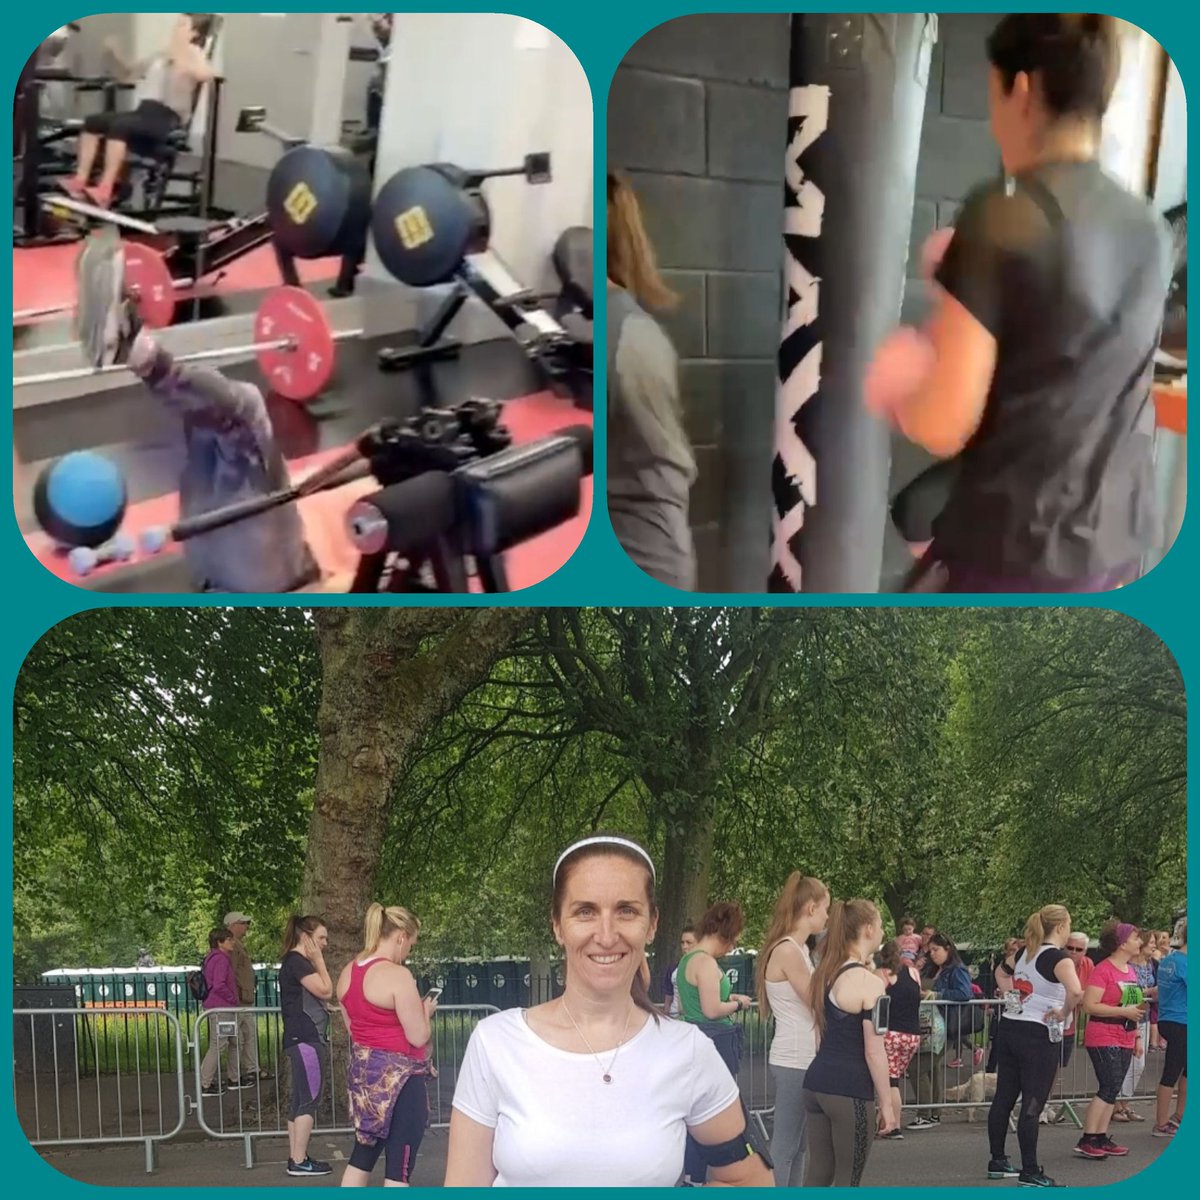 This year #MHAW22 is raising awareness of the impact of loneliness on our mental health.
I ❤ to spend time doing something active,whether it be walking, running,spin or boxing to clear my head,reconnect with myself or connect with others
#MentalHealthAwarenessWeek #letsconnect